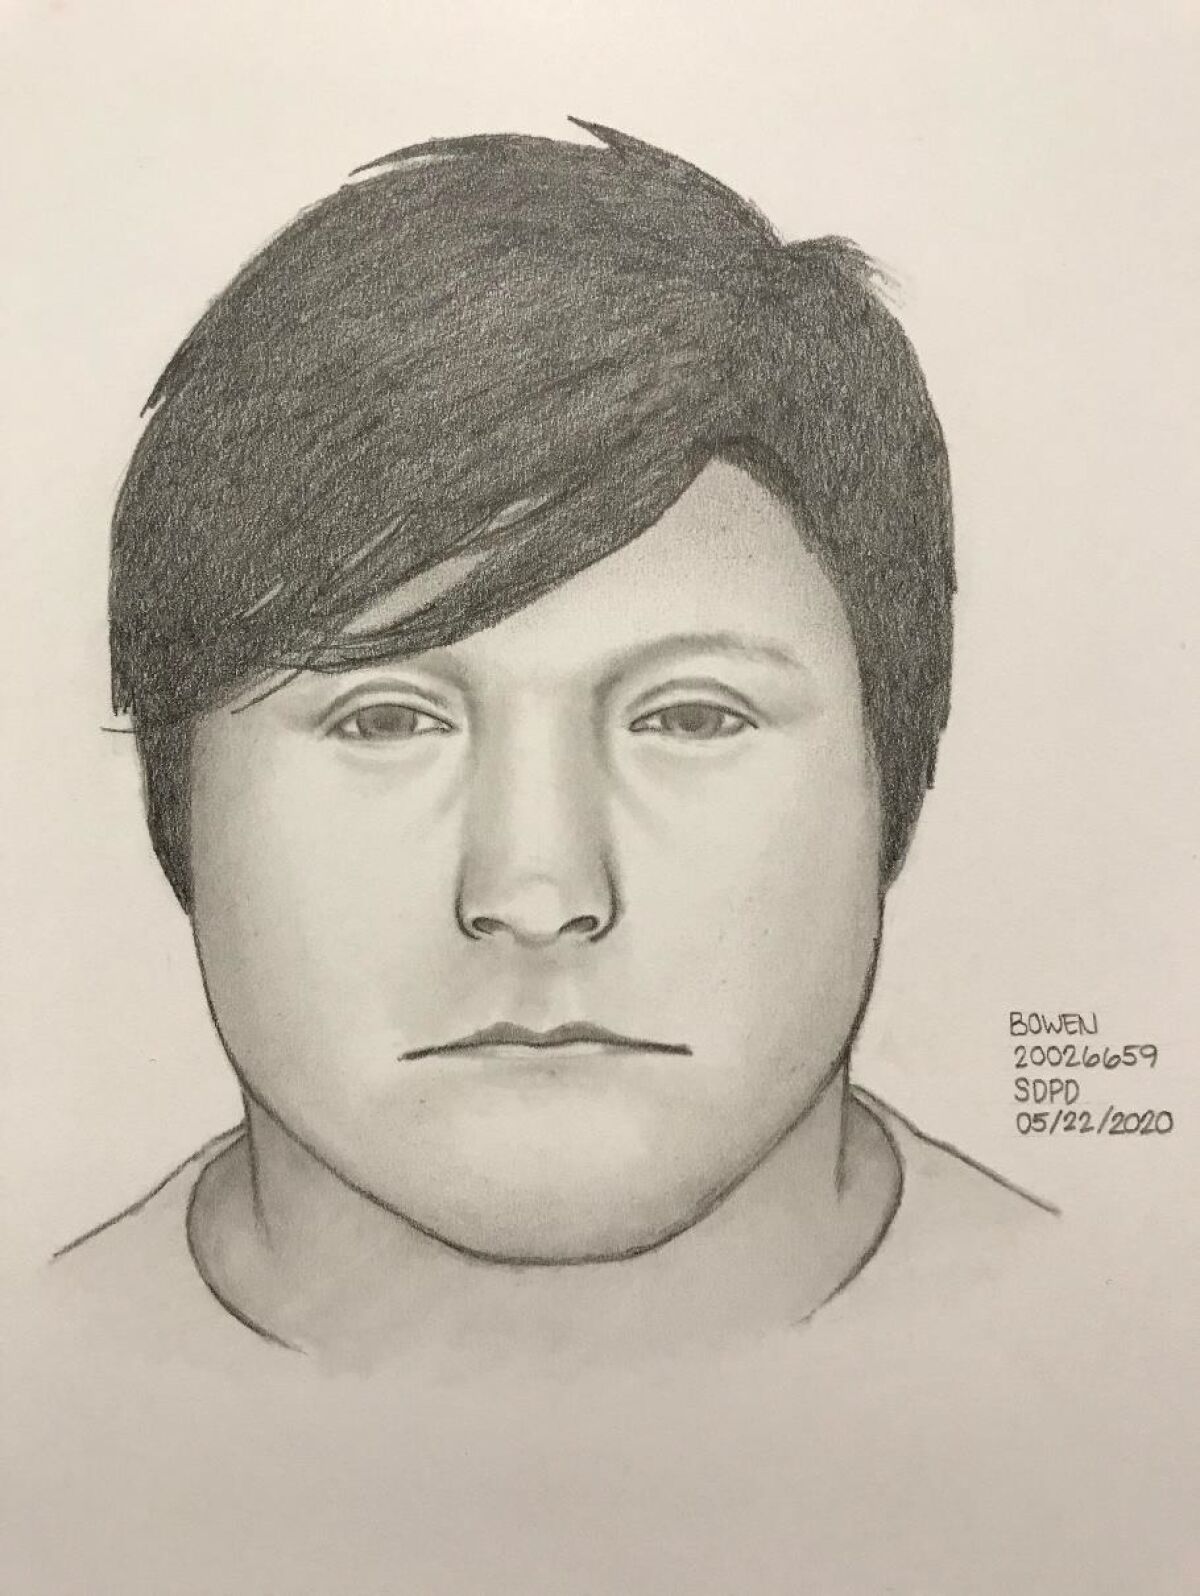 Police released this composite sketch of a man sought in a sexual assault on a 55-year-old woman last week in the Midway District.